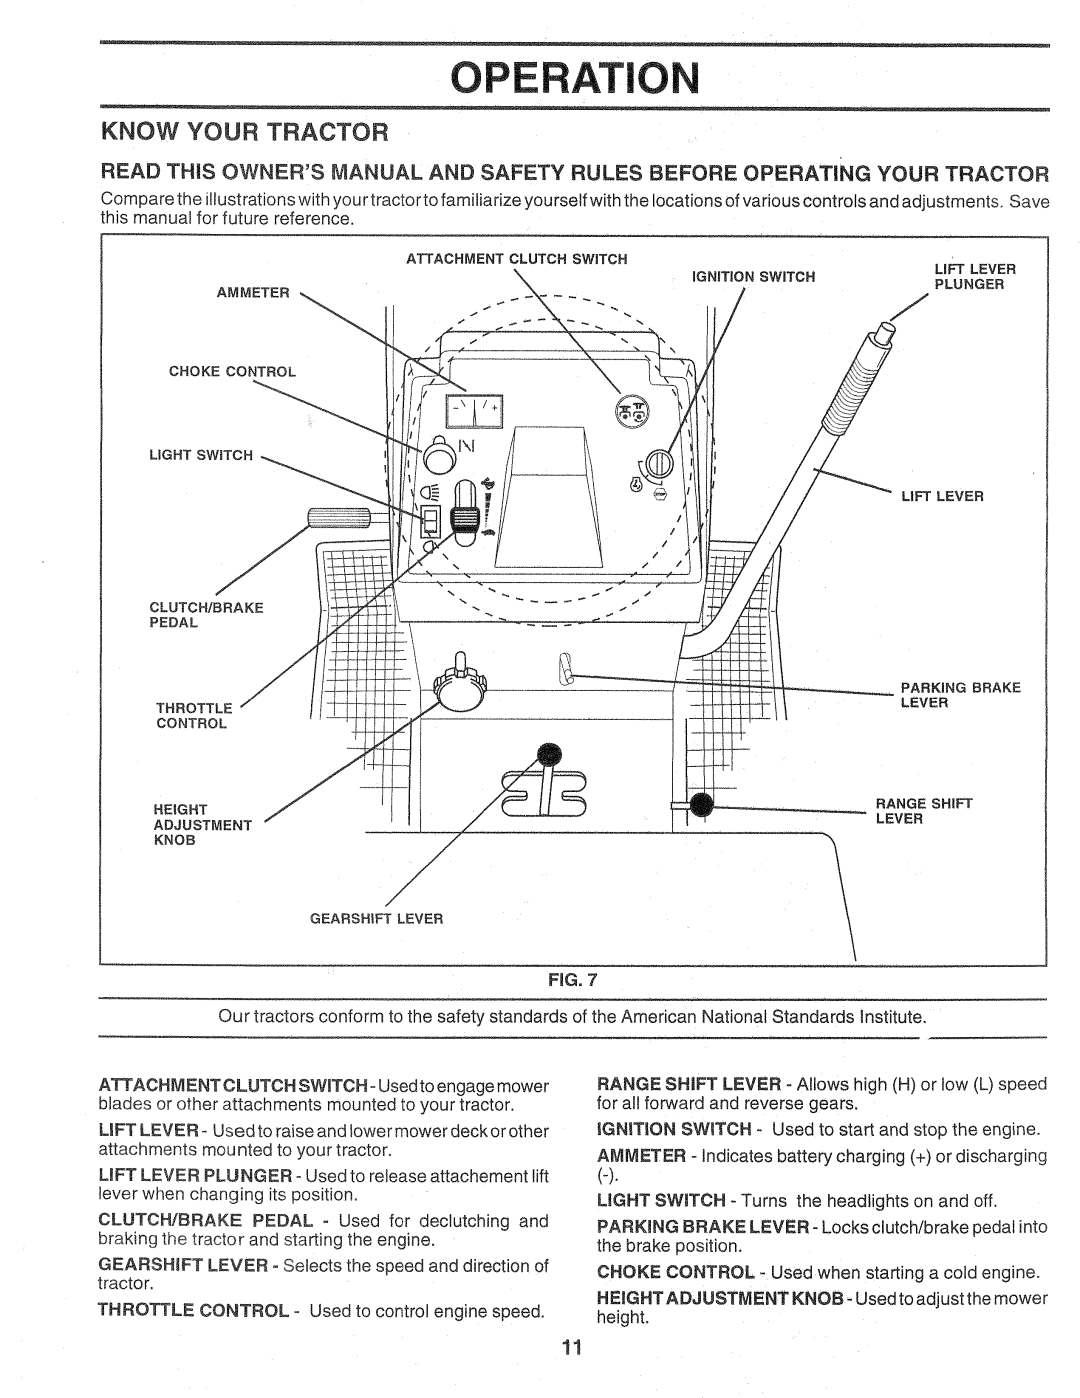 Sears 917.257720 owner manual Eration, Know Your Tractor 